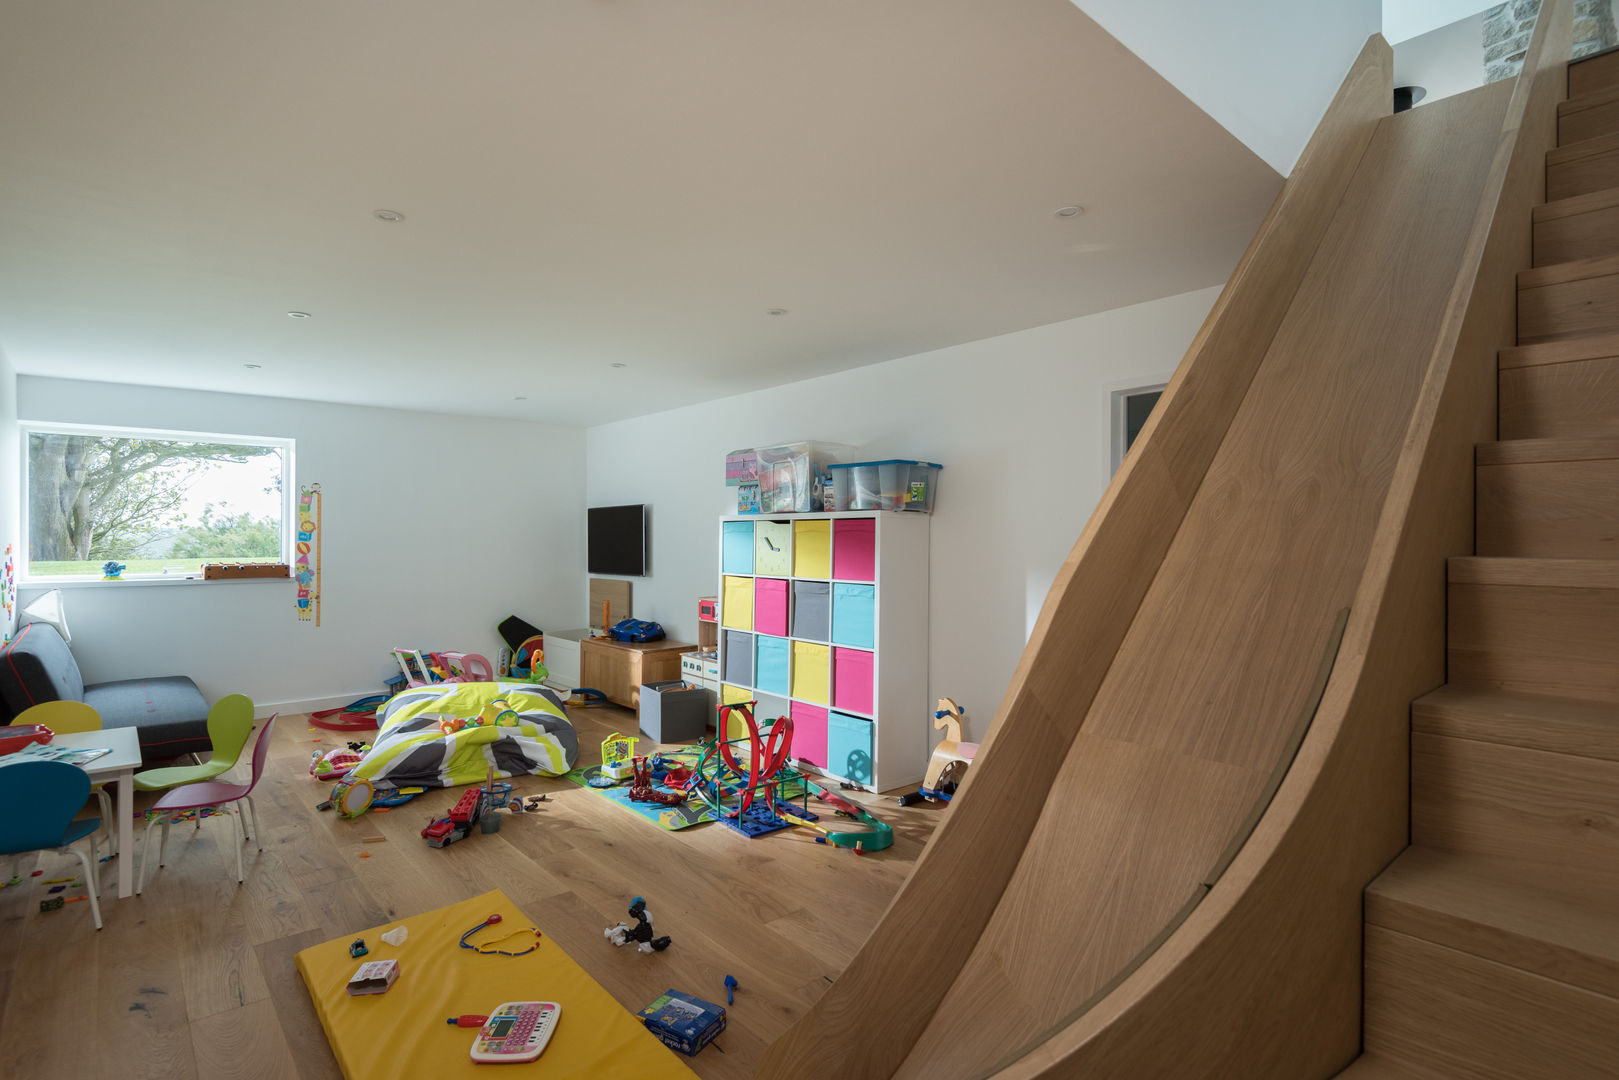 Contemporary Replacement Dwelling, Cubert, Laurence Associates Laurence Associates 嬰兒房/兒童房 play room,game room,internal slide,fun,games,storage,children,toys,modular storage,bright colours,play,kids room